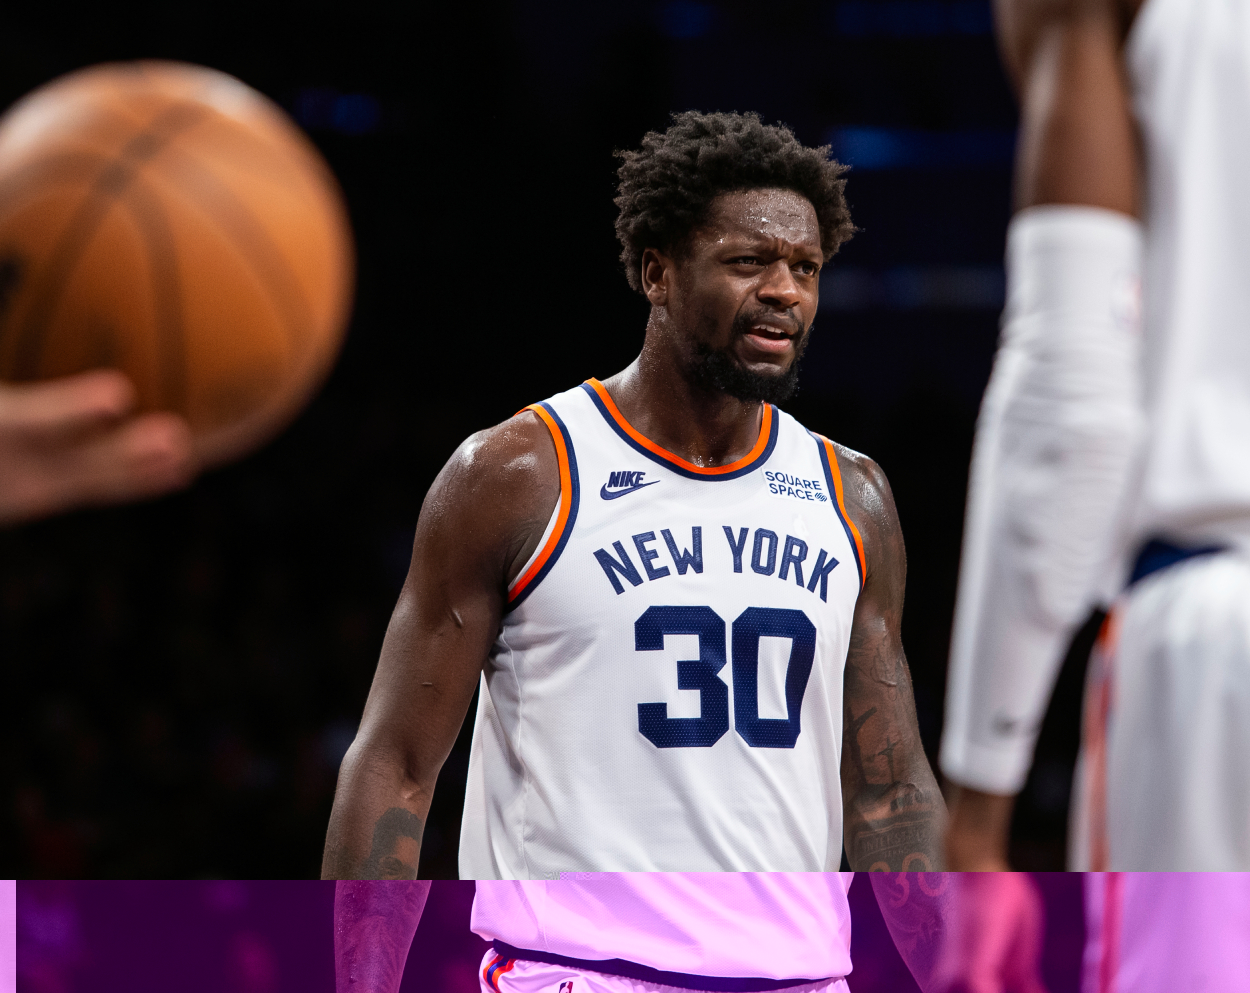 Julius Randle of the New York Knicks reacts during the game against the Brooklyn Nets.